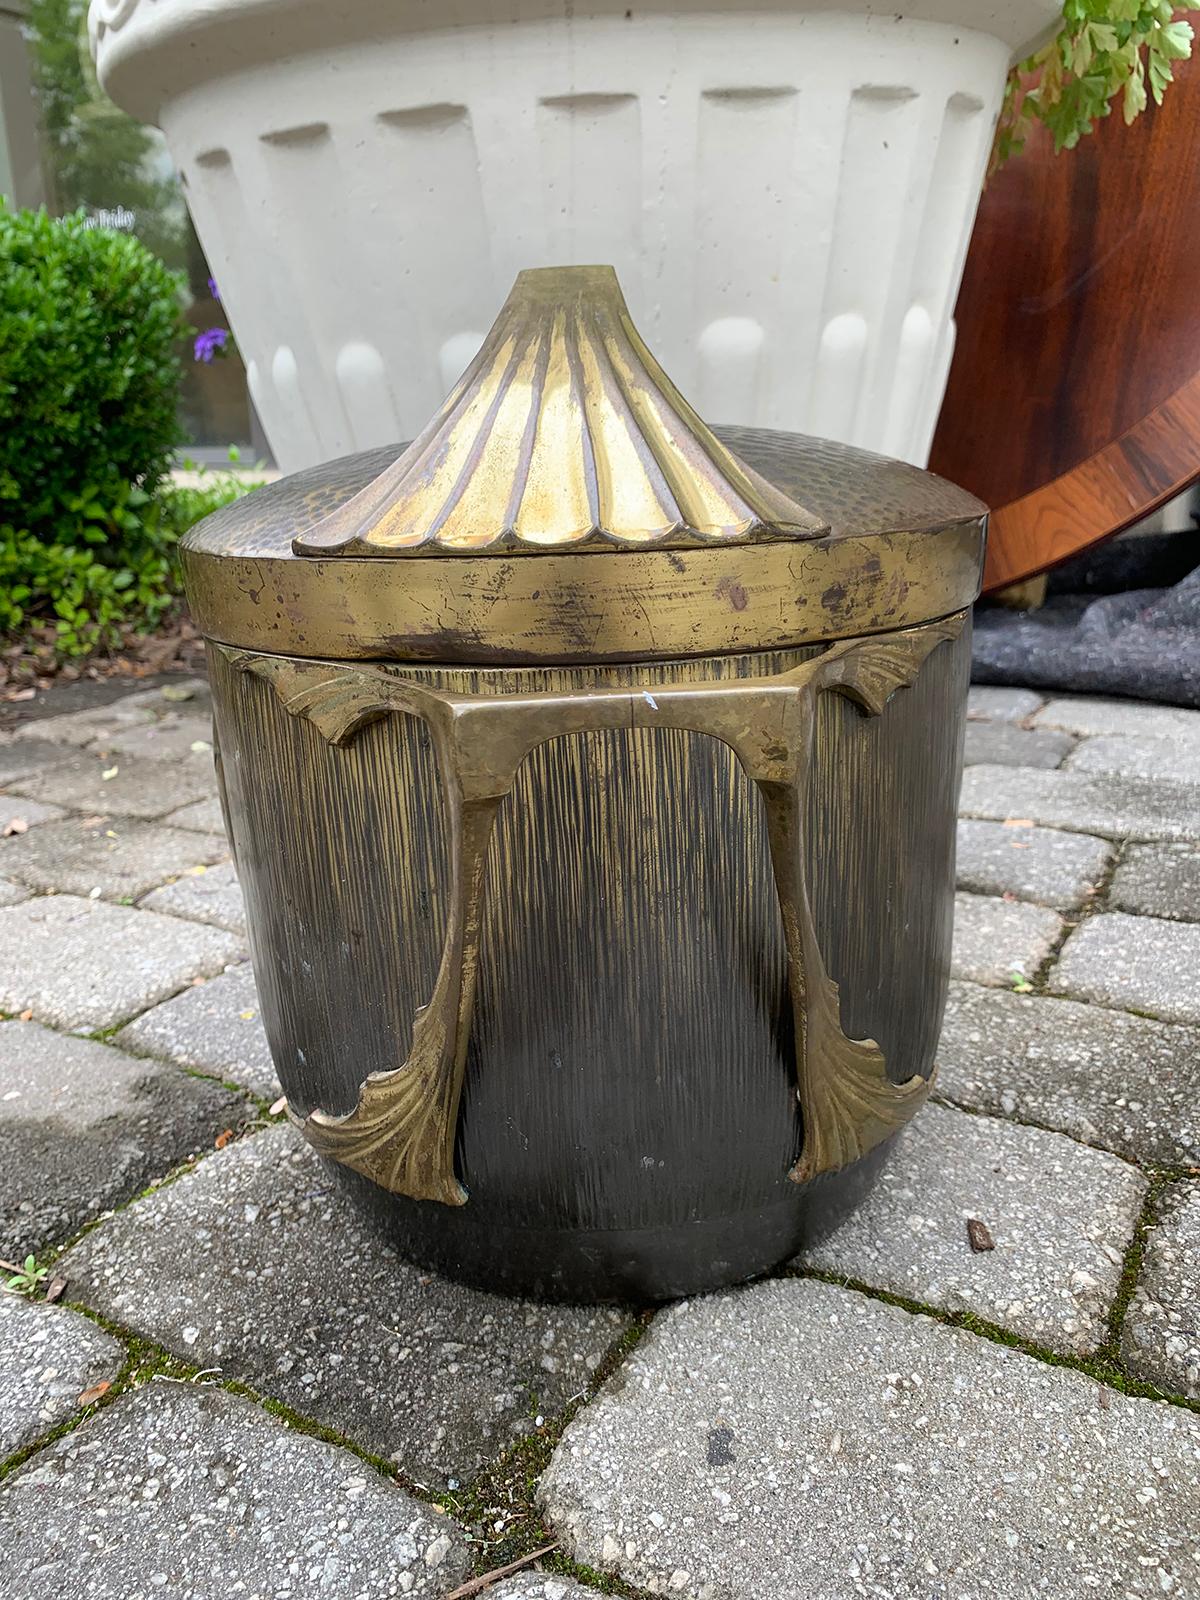 Early 20th Century Art Nouveau Bronze Wine Bucket with Lid, circa 1900